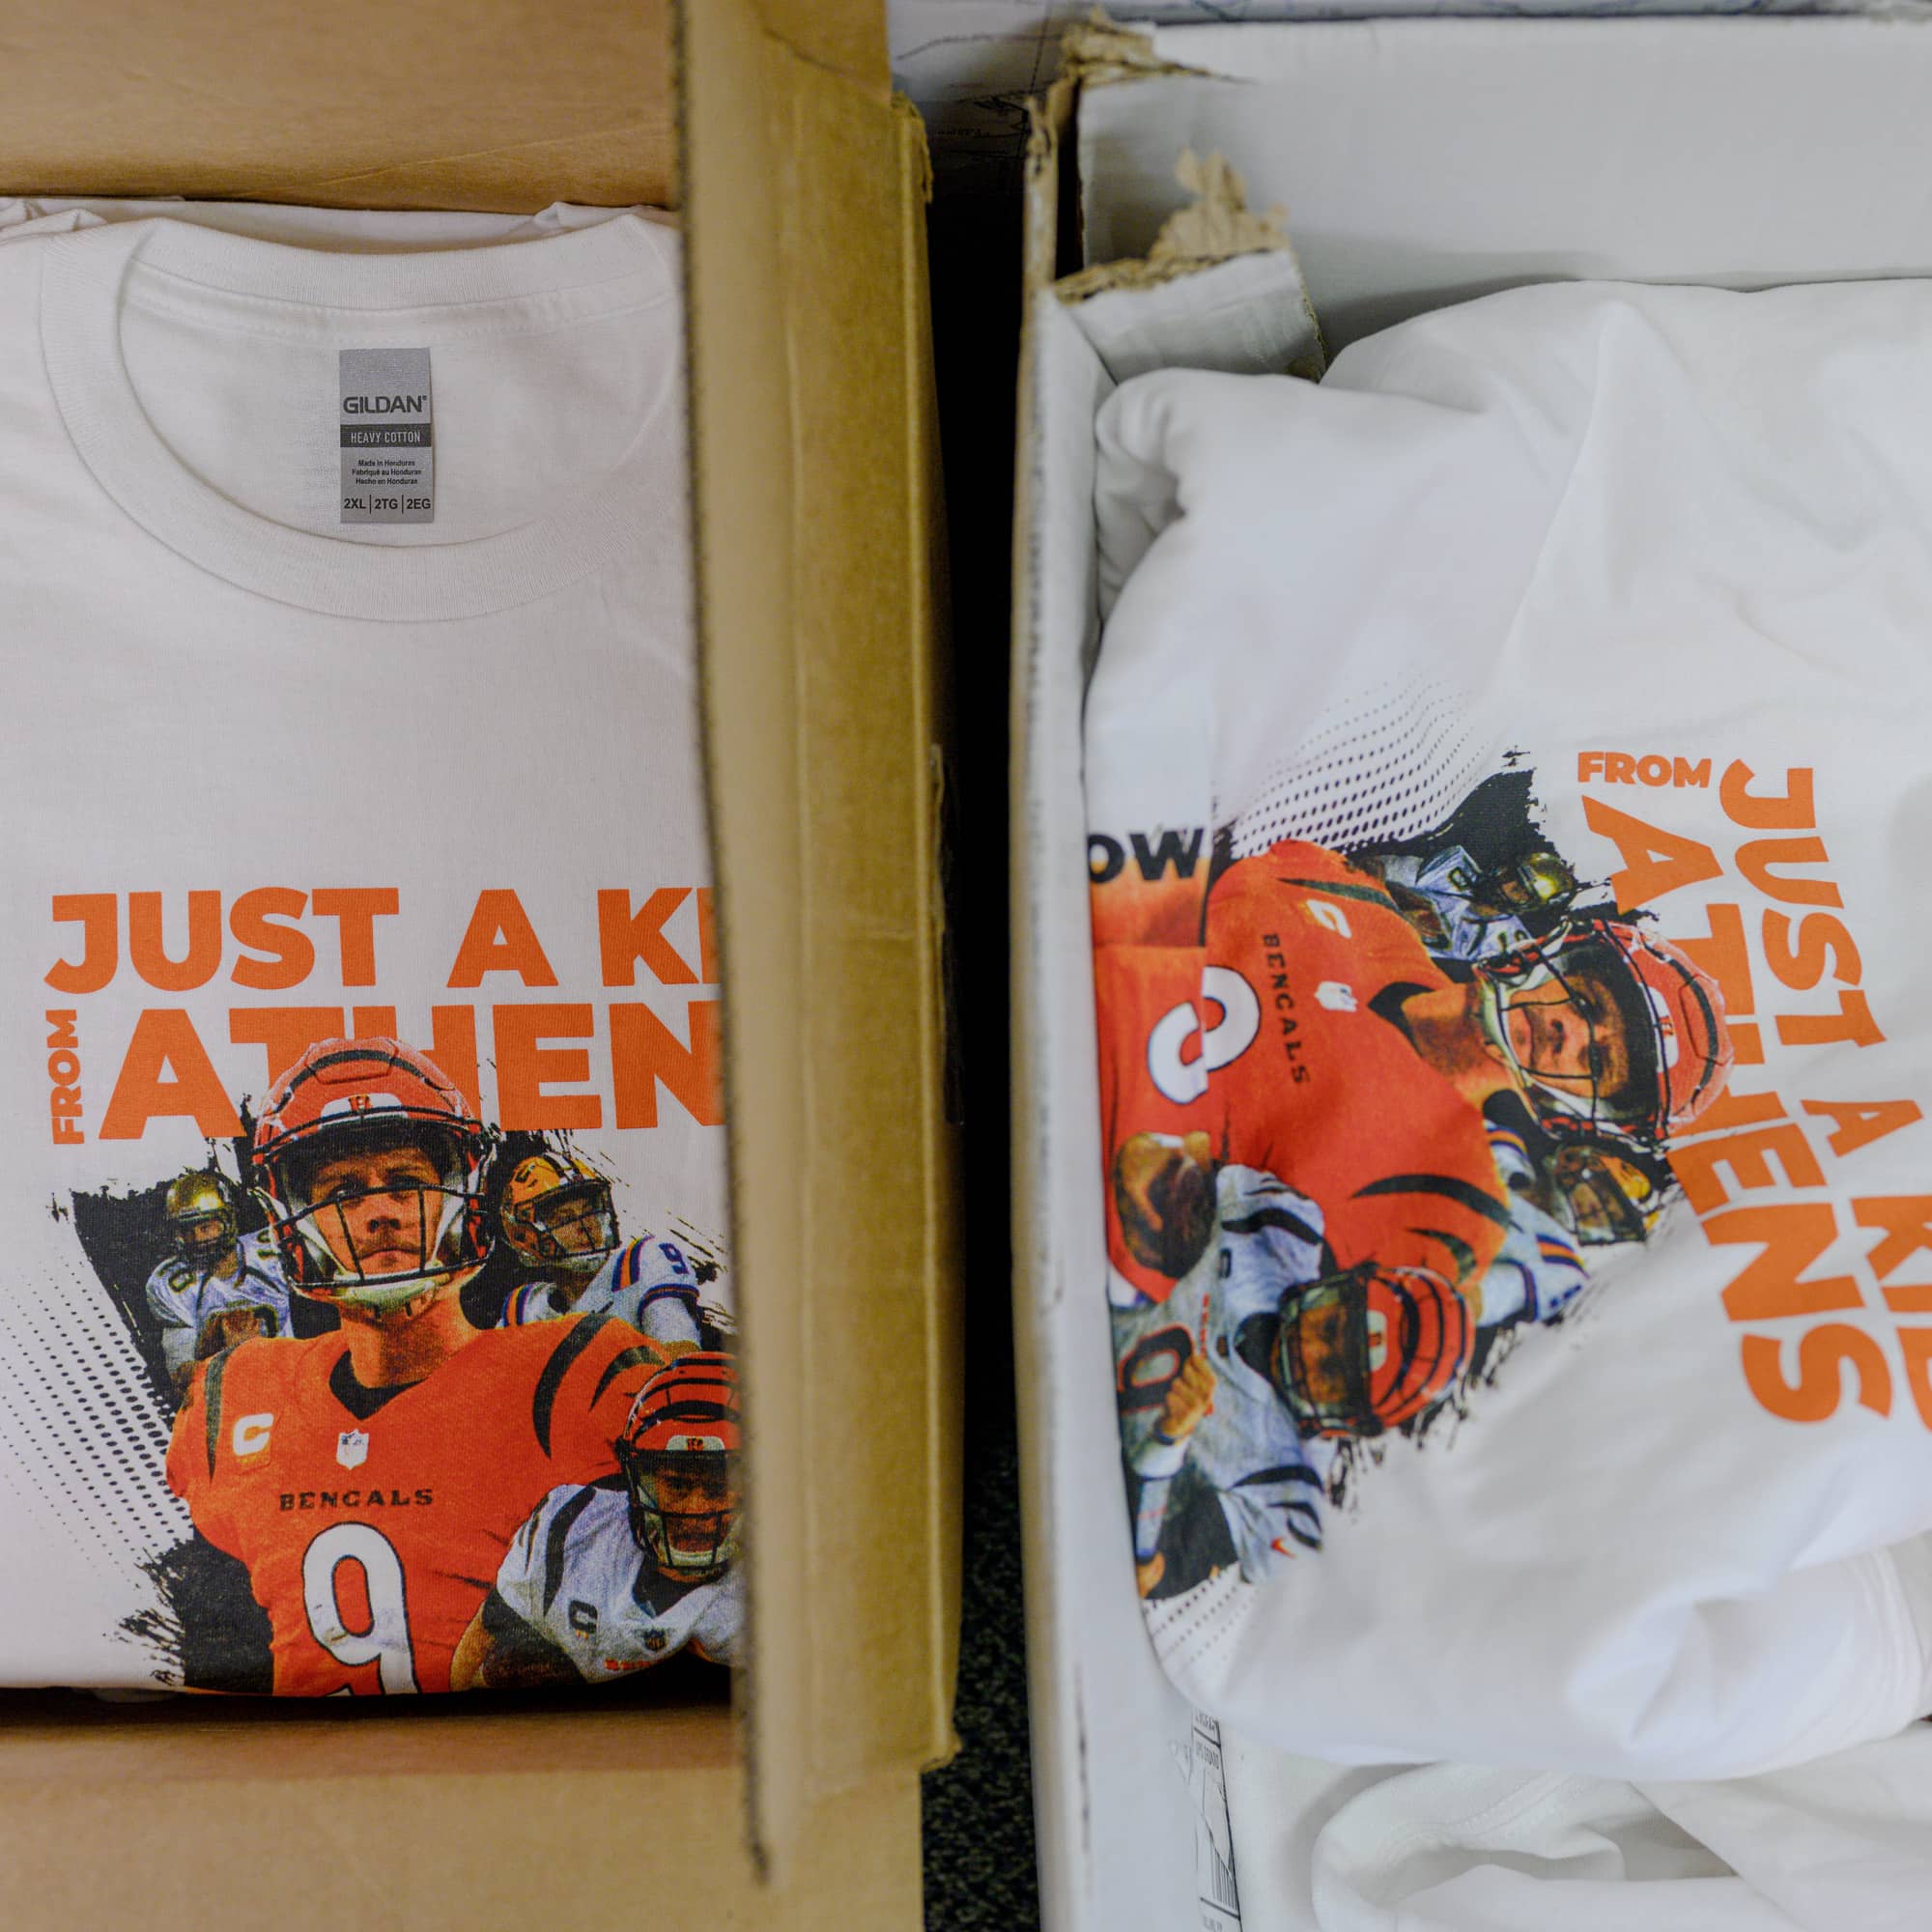 The Athens Messenger has sold several hundred Joe Burrow tee shirts, over the course of two days, since they were made available to the public.